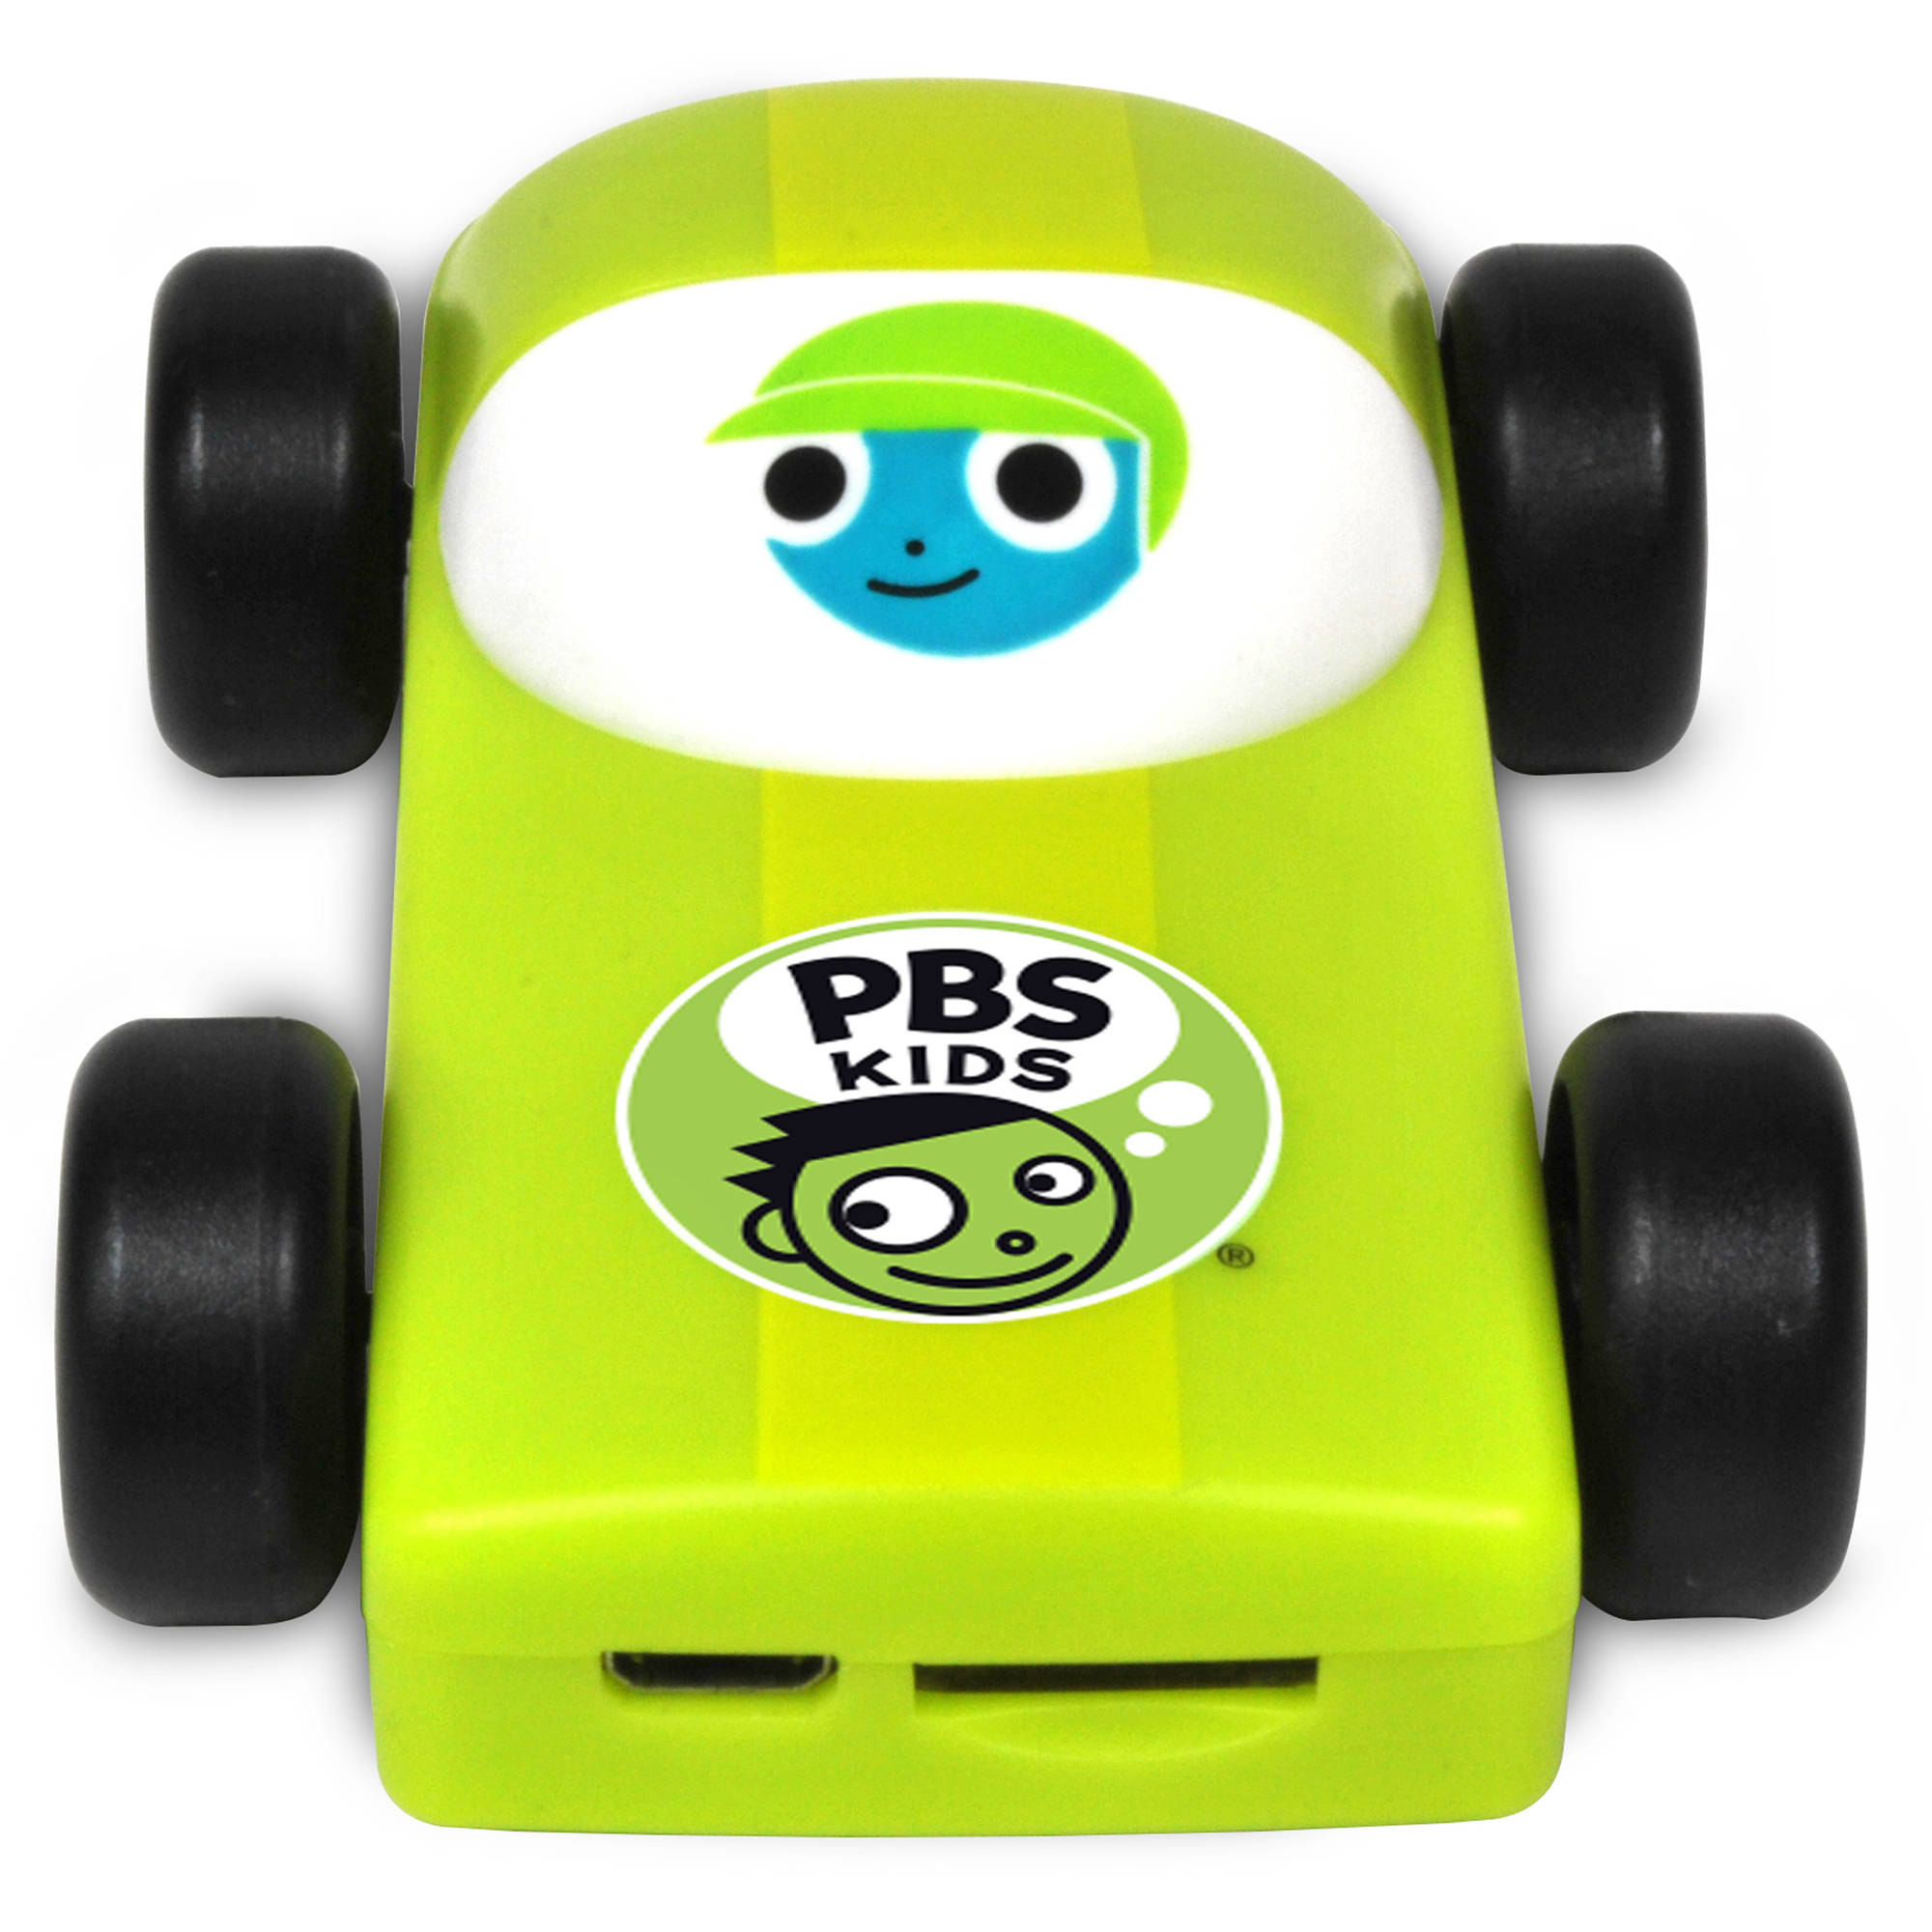 PBS HDMI Streaming Stick - image 3 of 10